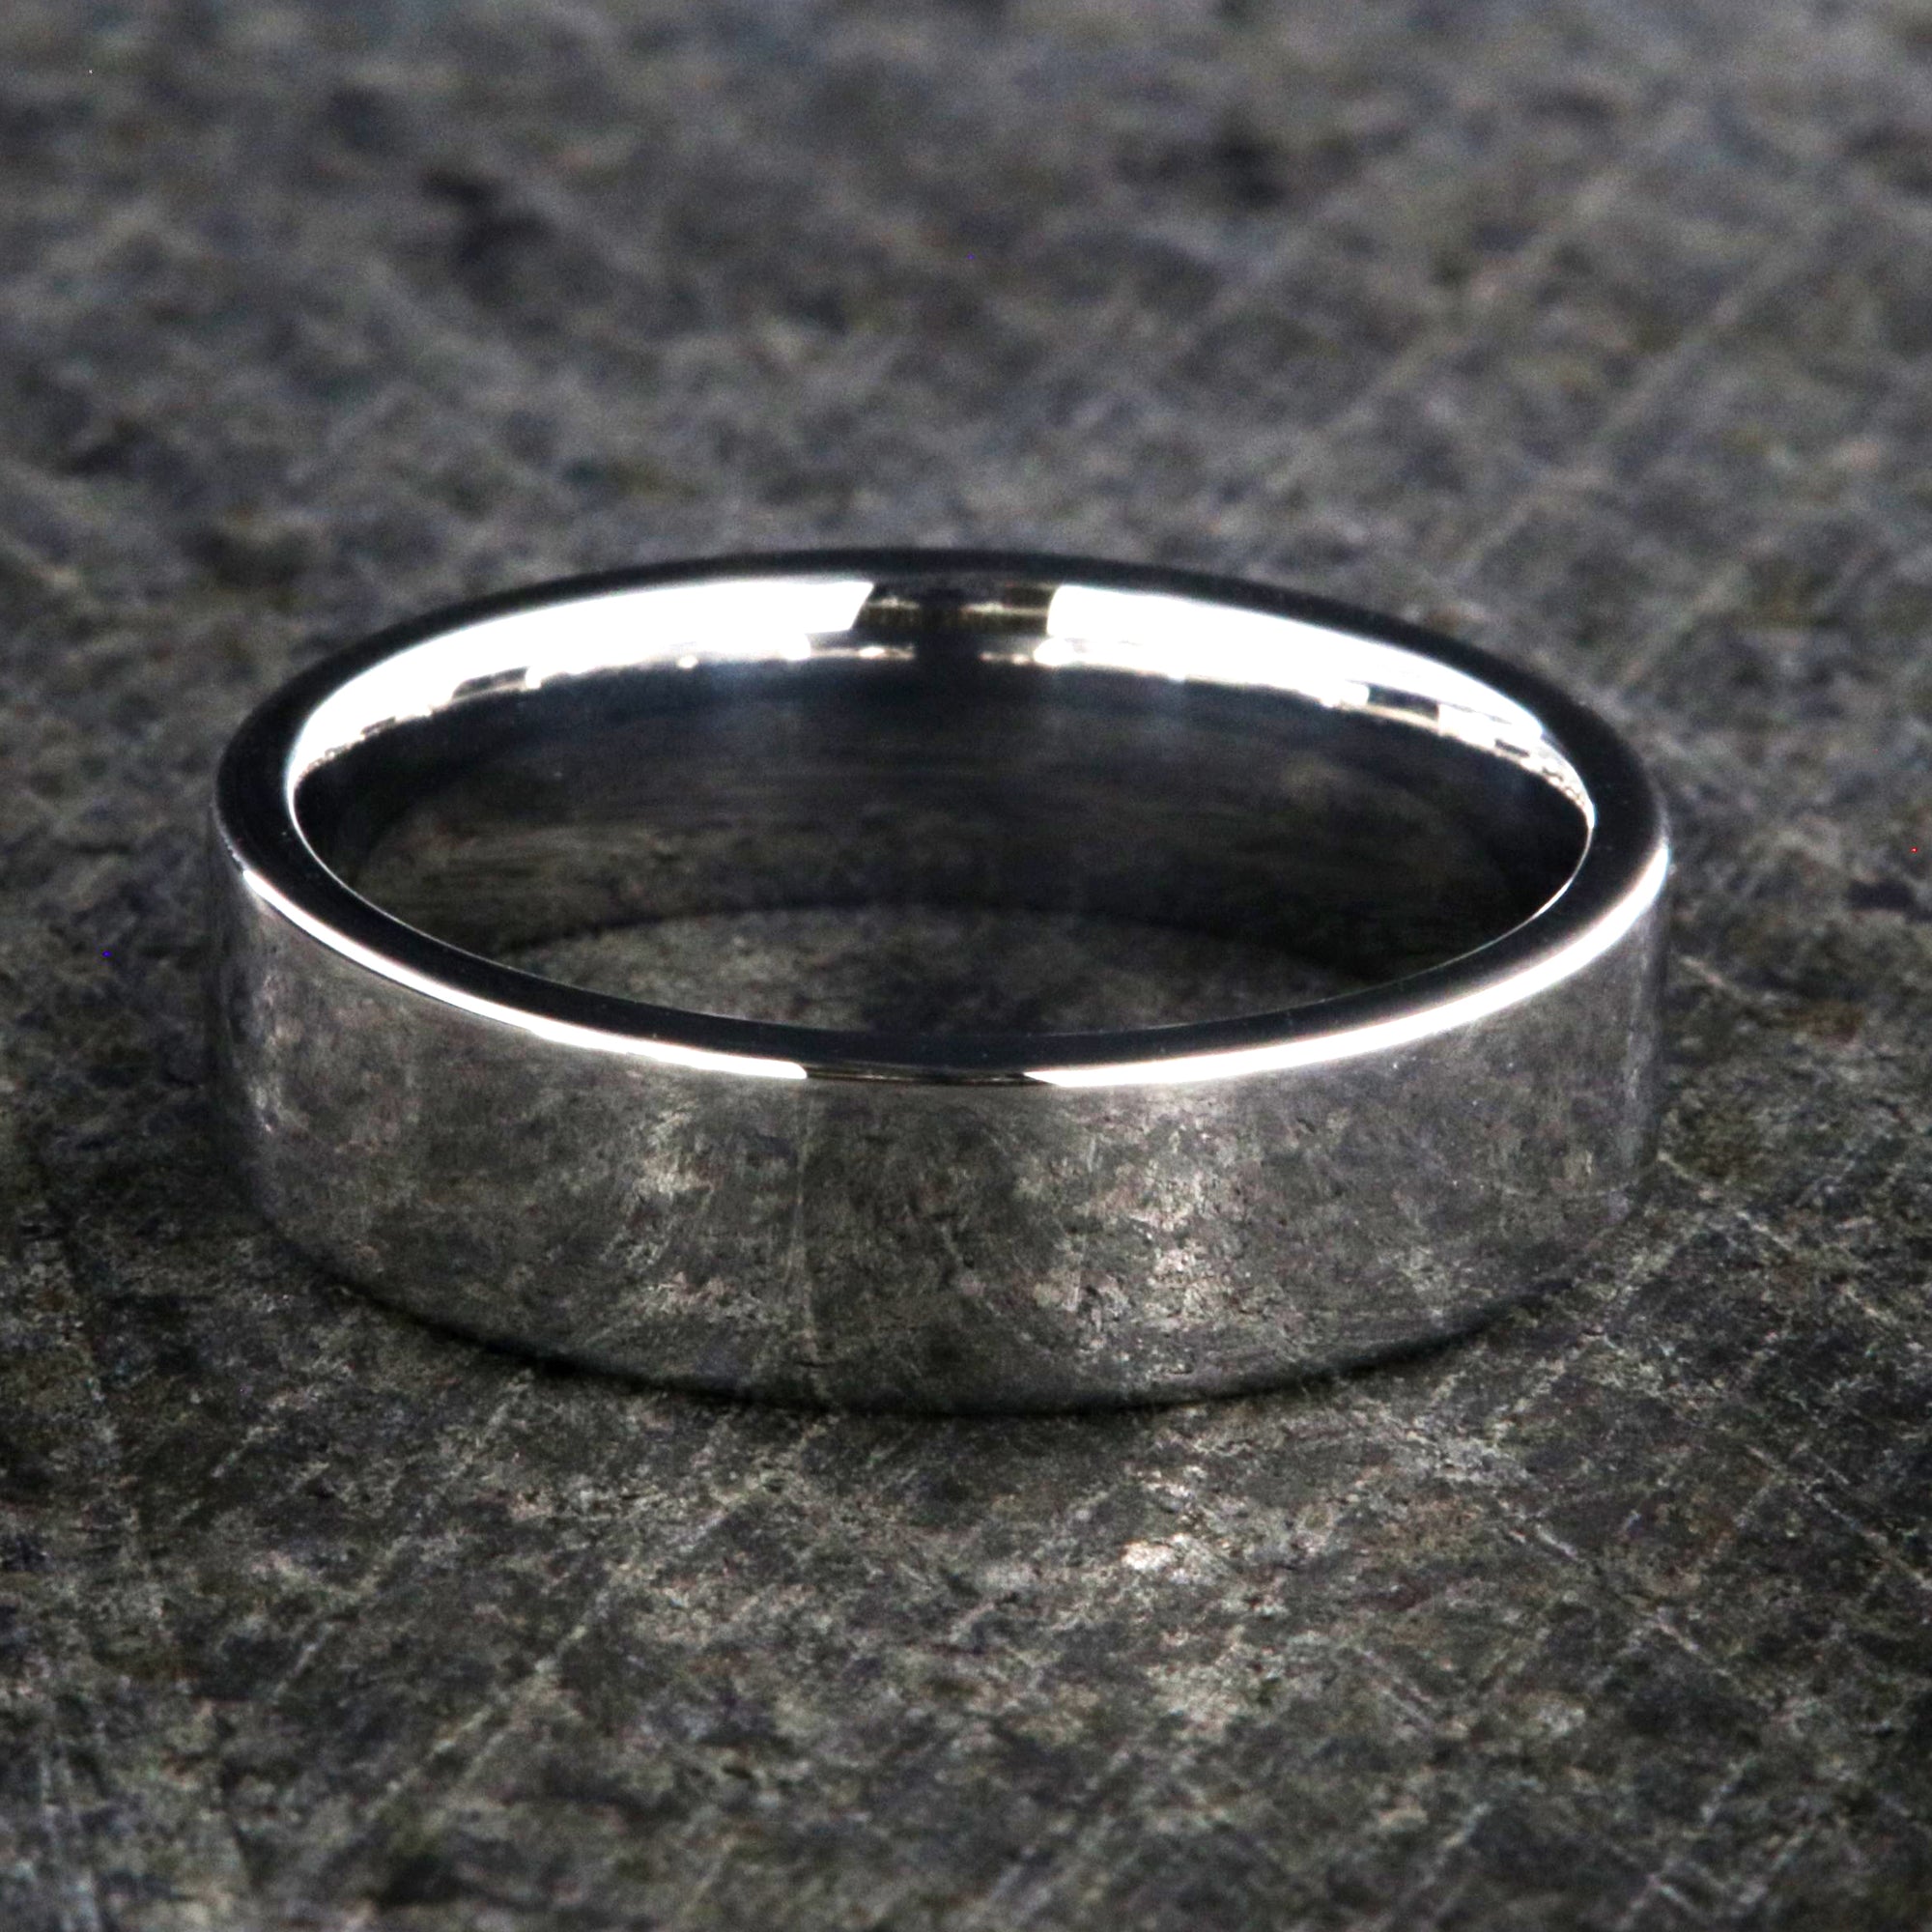 6mm wide cobalt ring with a polished finish and a flat profile